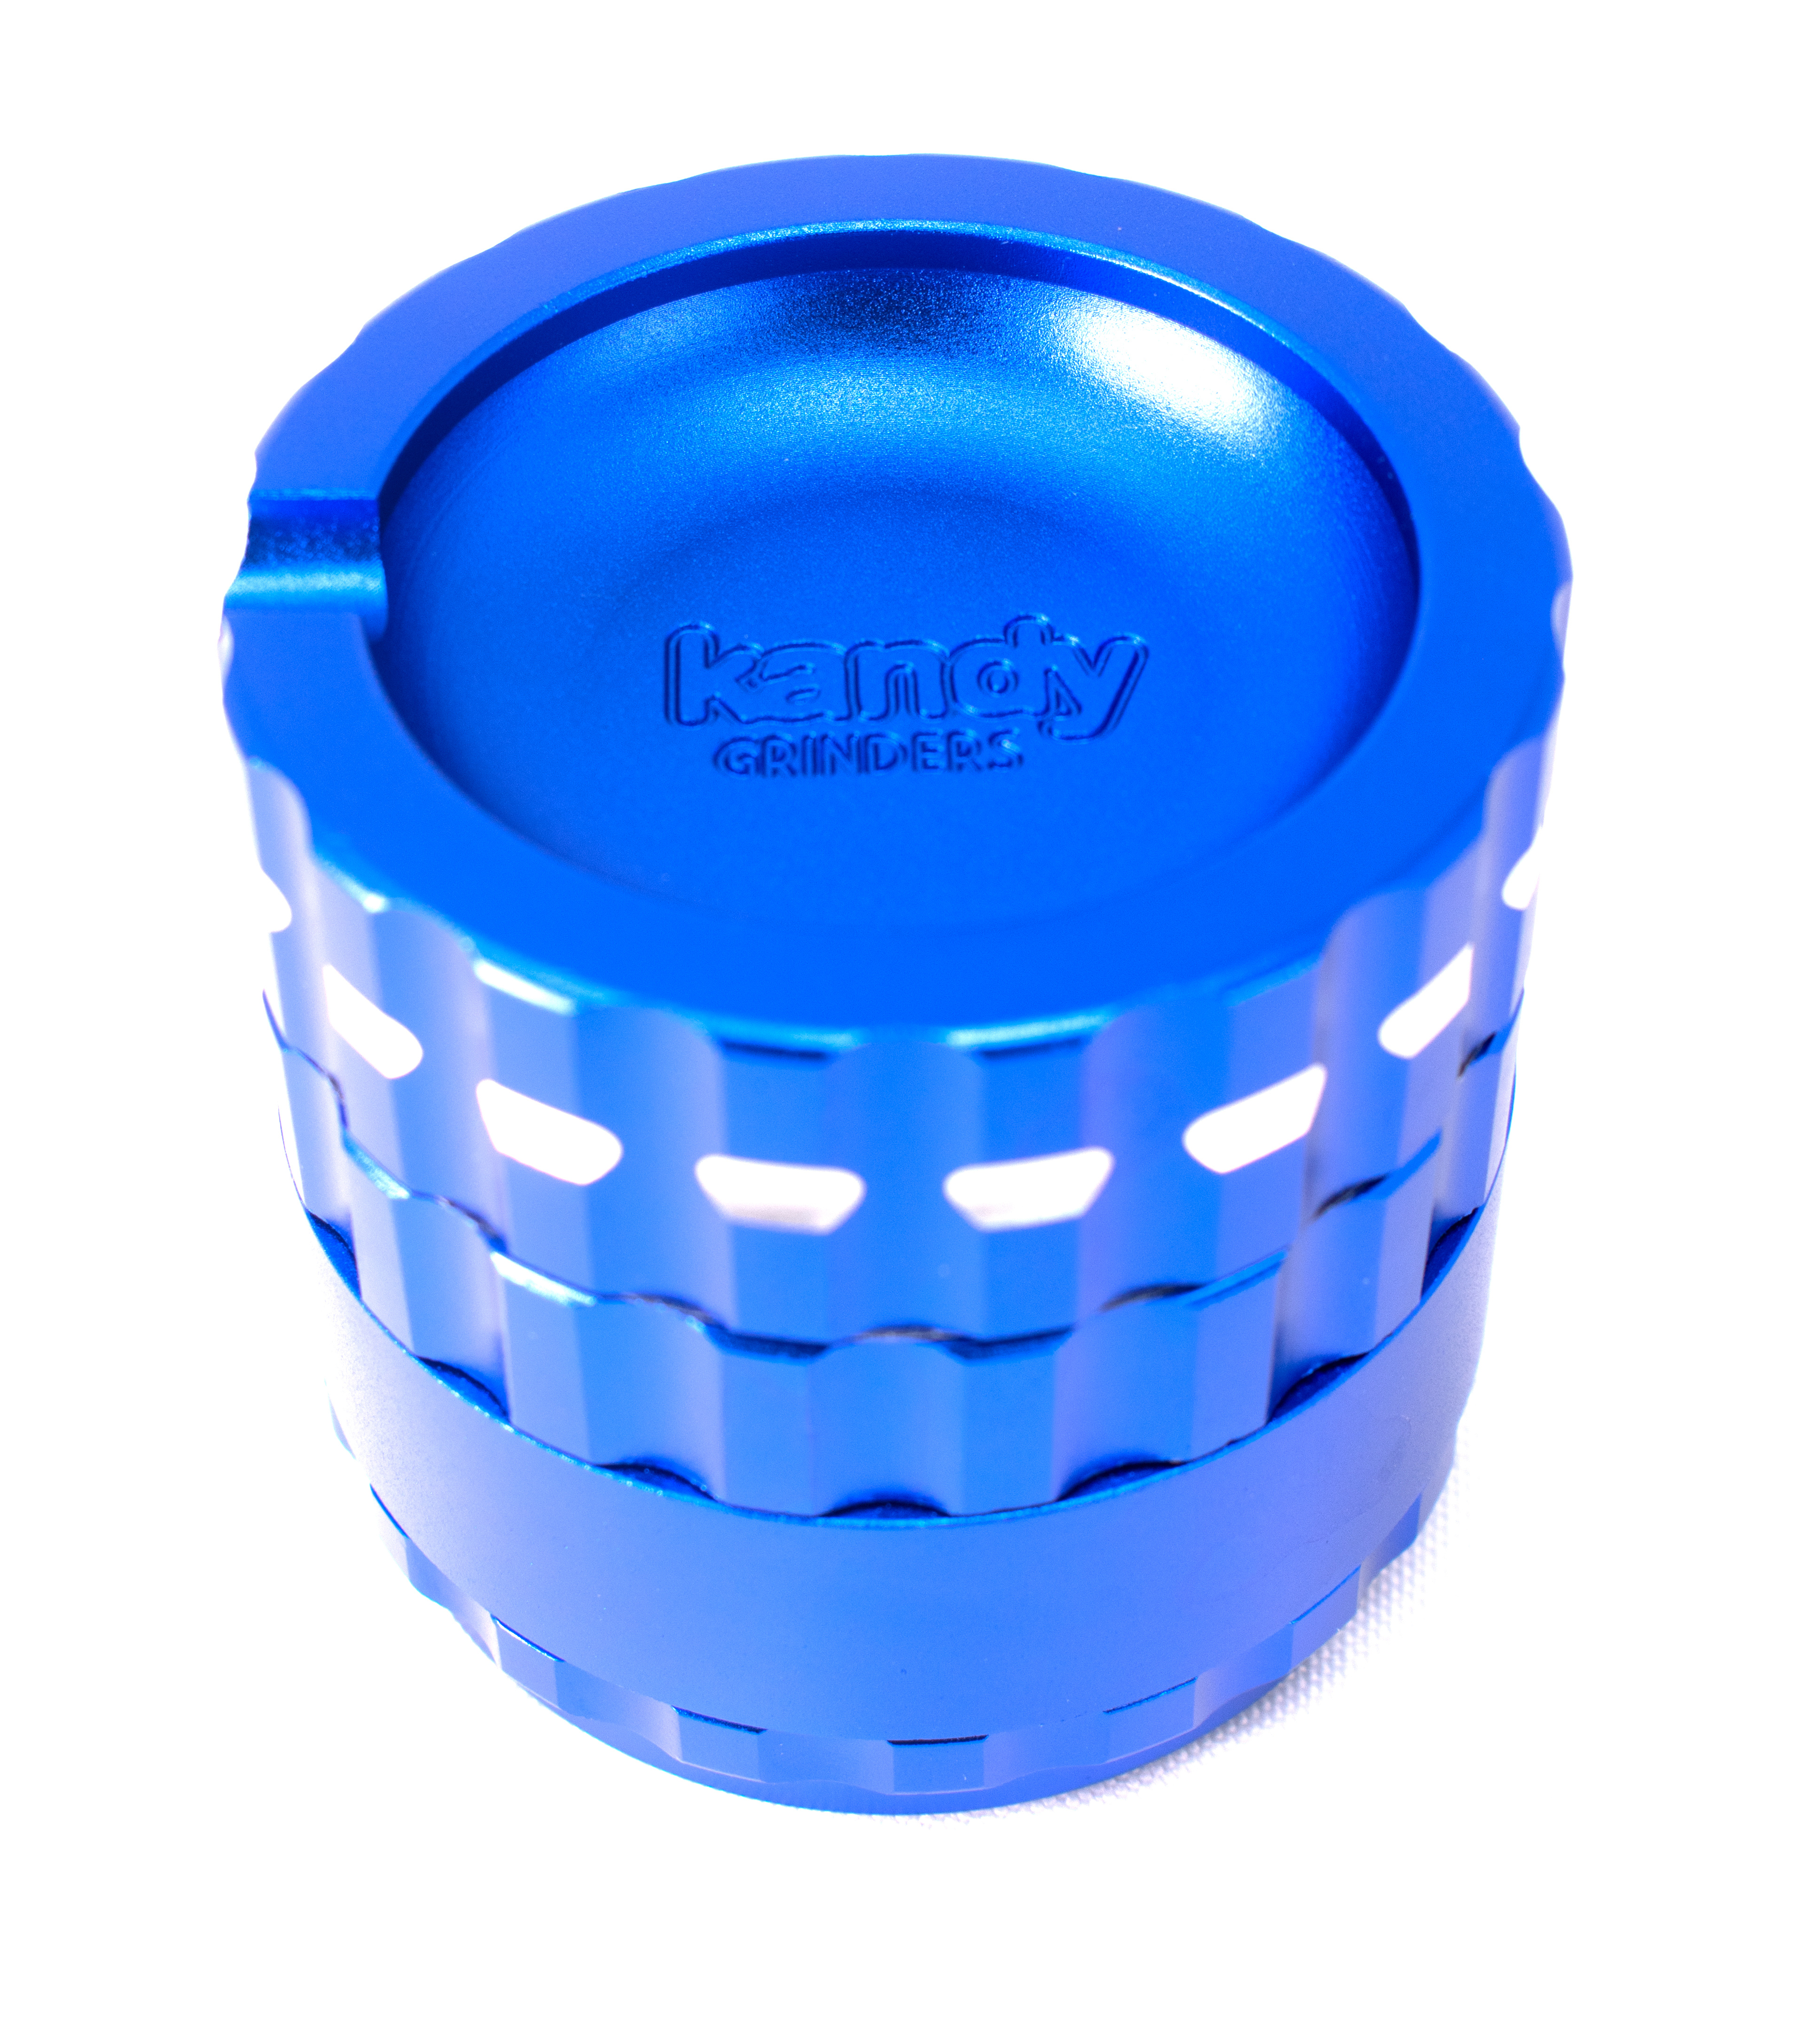 Kandy Grinder Metal Ribbed Shape W/ashtray On The Top 62mm 4pts 